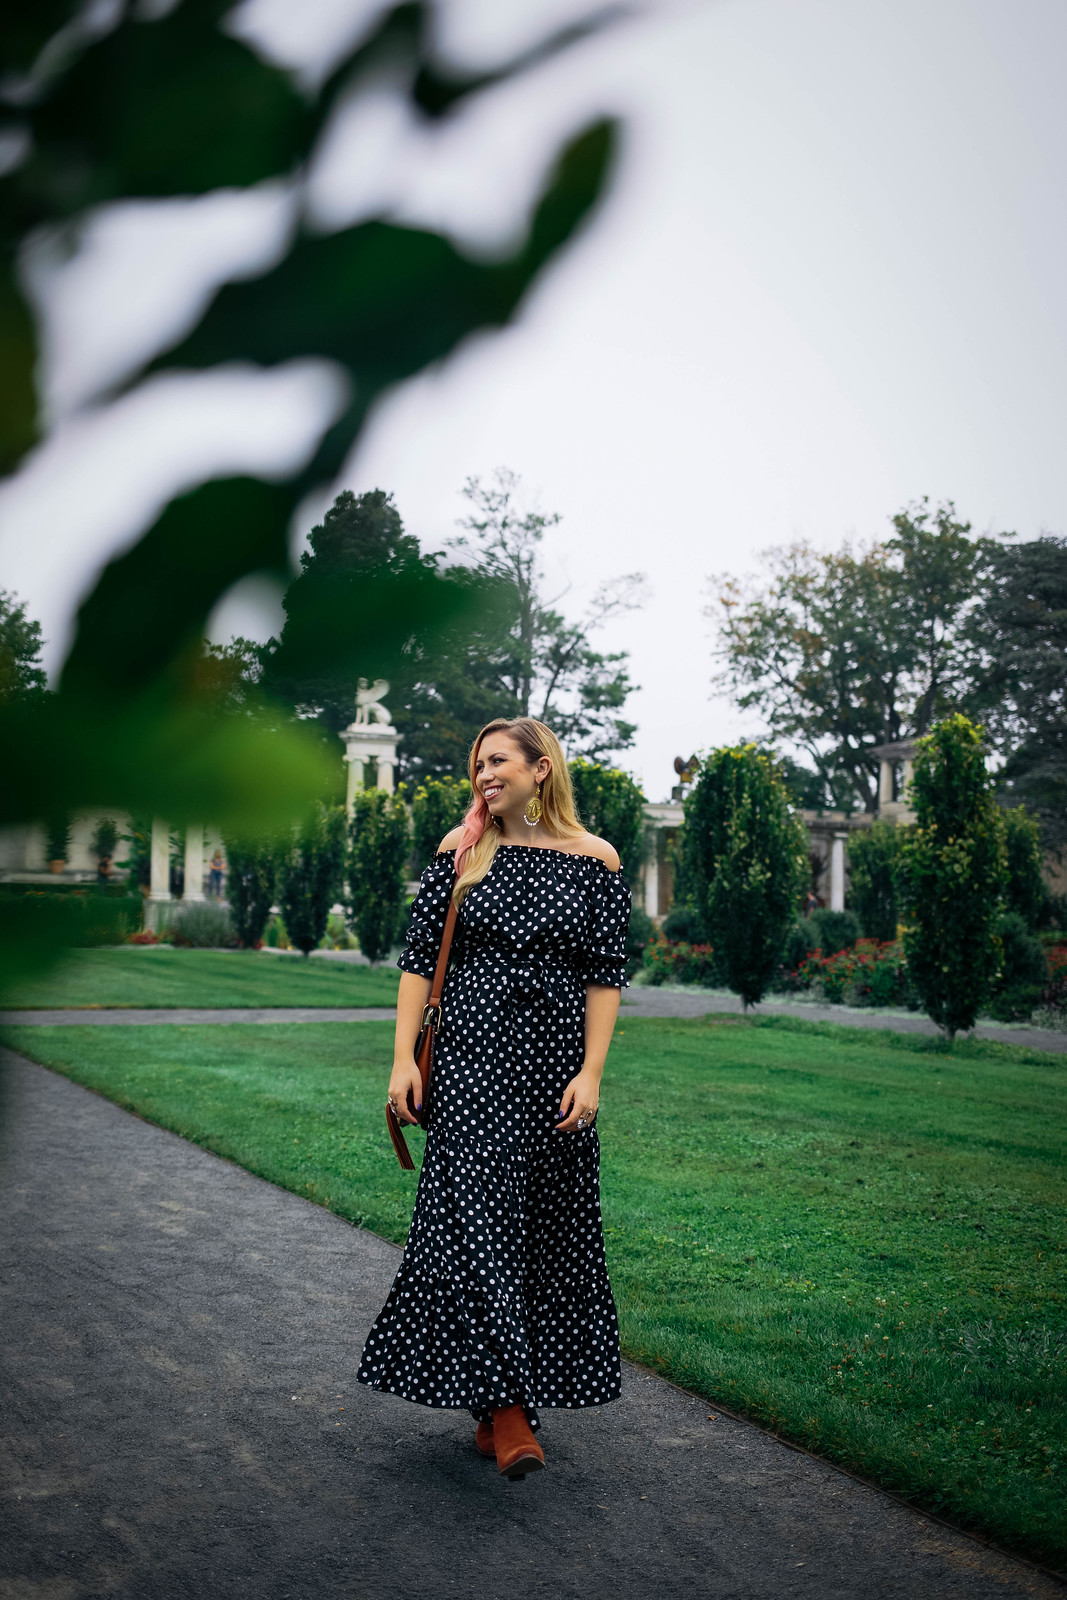 Amazon Polka Dot Maxi Dress Untermyer Gardens Yonkers NY When Did Amazon Start Selling the Best Clothes?